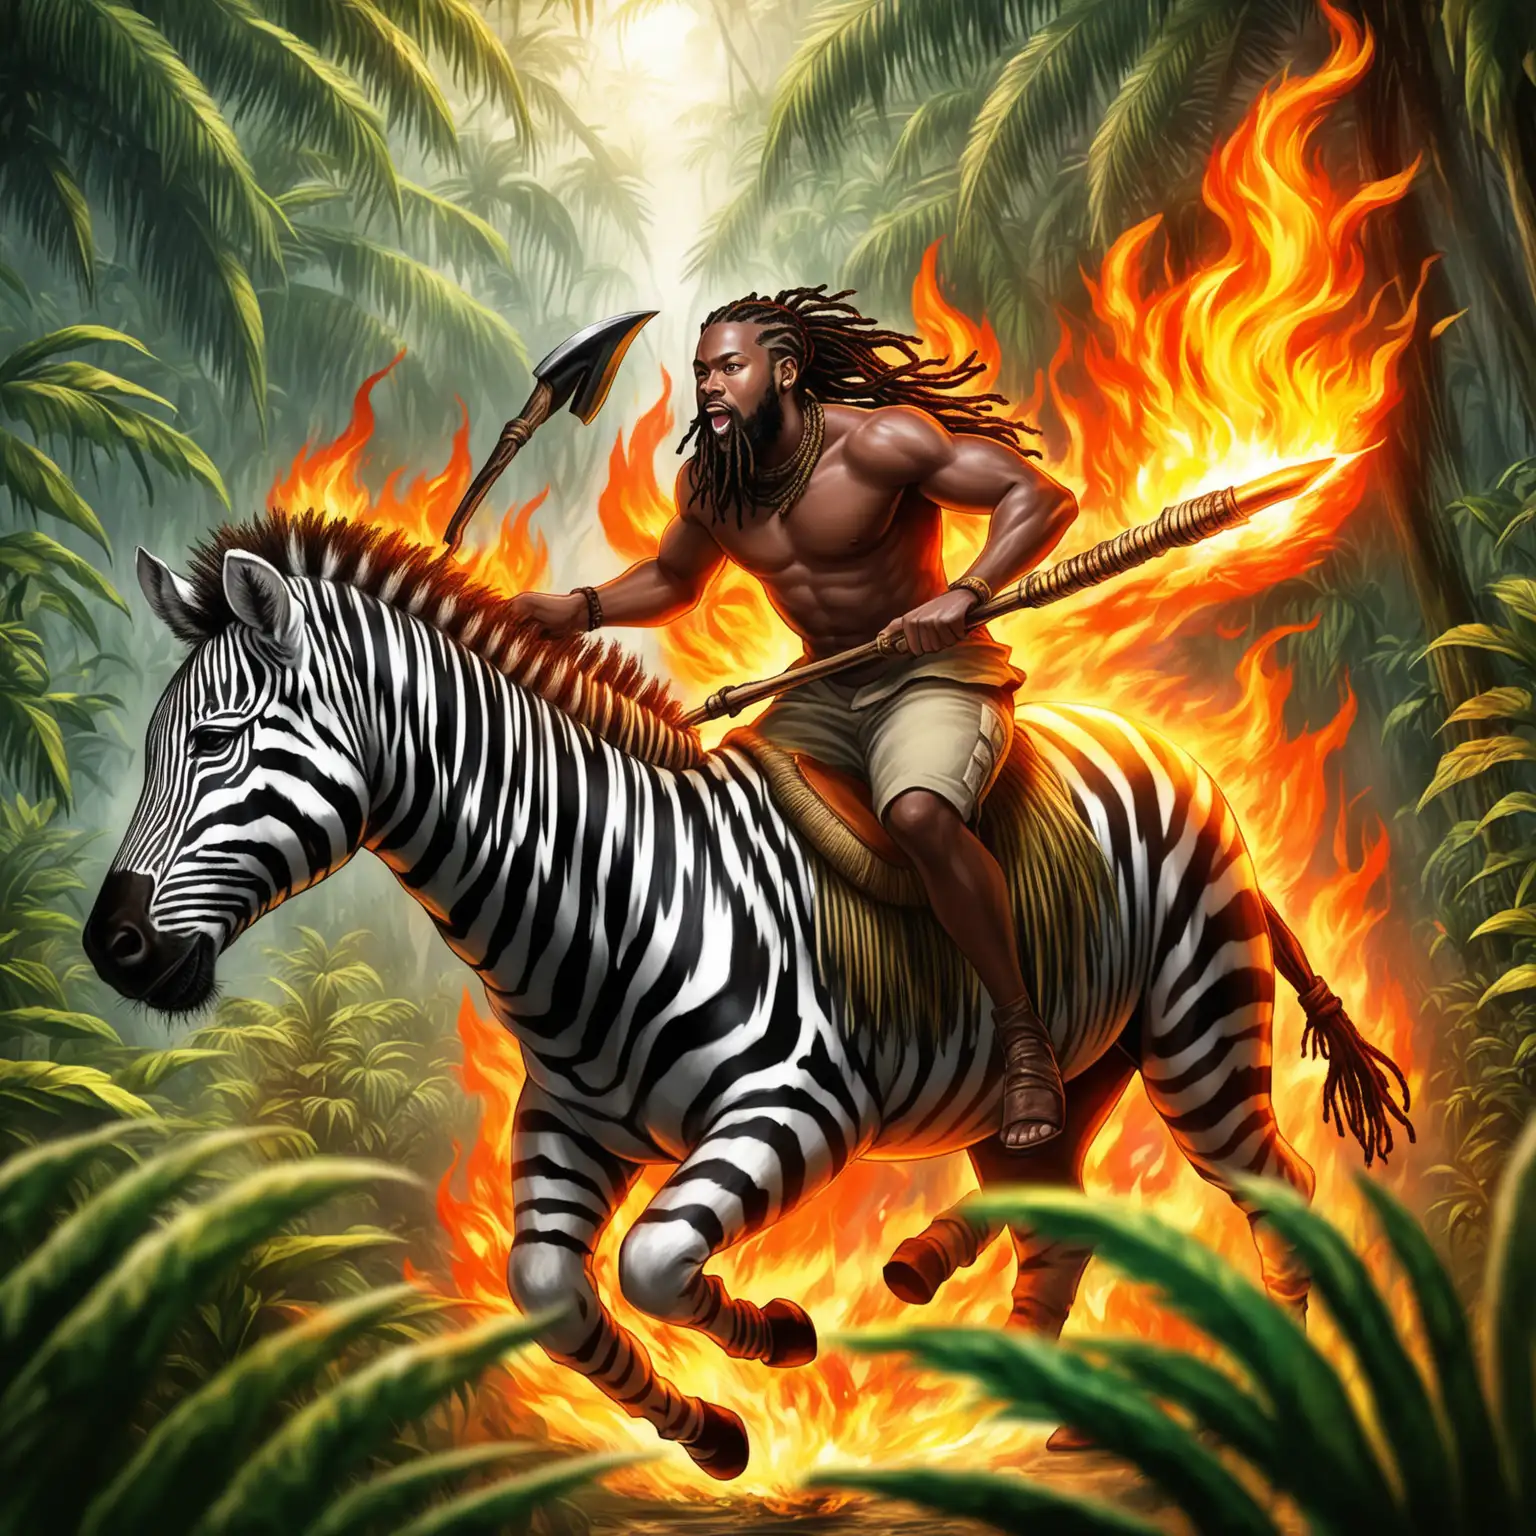 Create a 4k glossy oil airbrushed image of a young African American male with black dread locs and beard riding a zebra in the jungle while wielding fire.